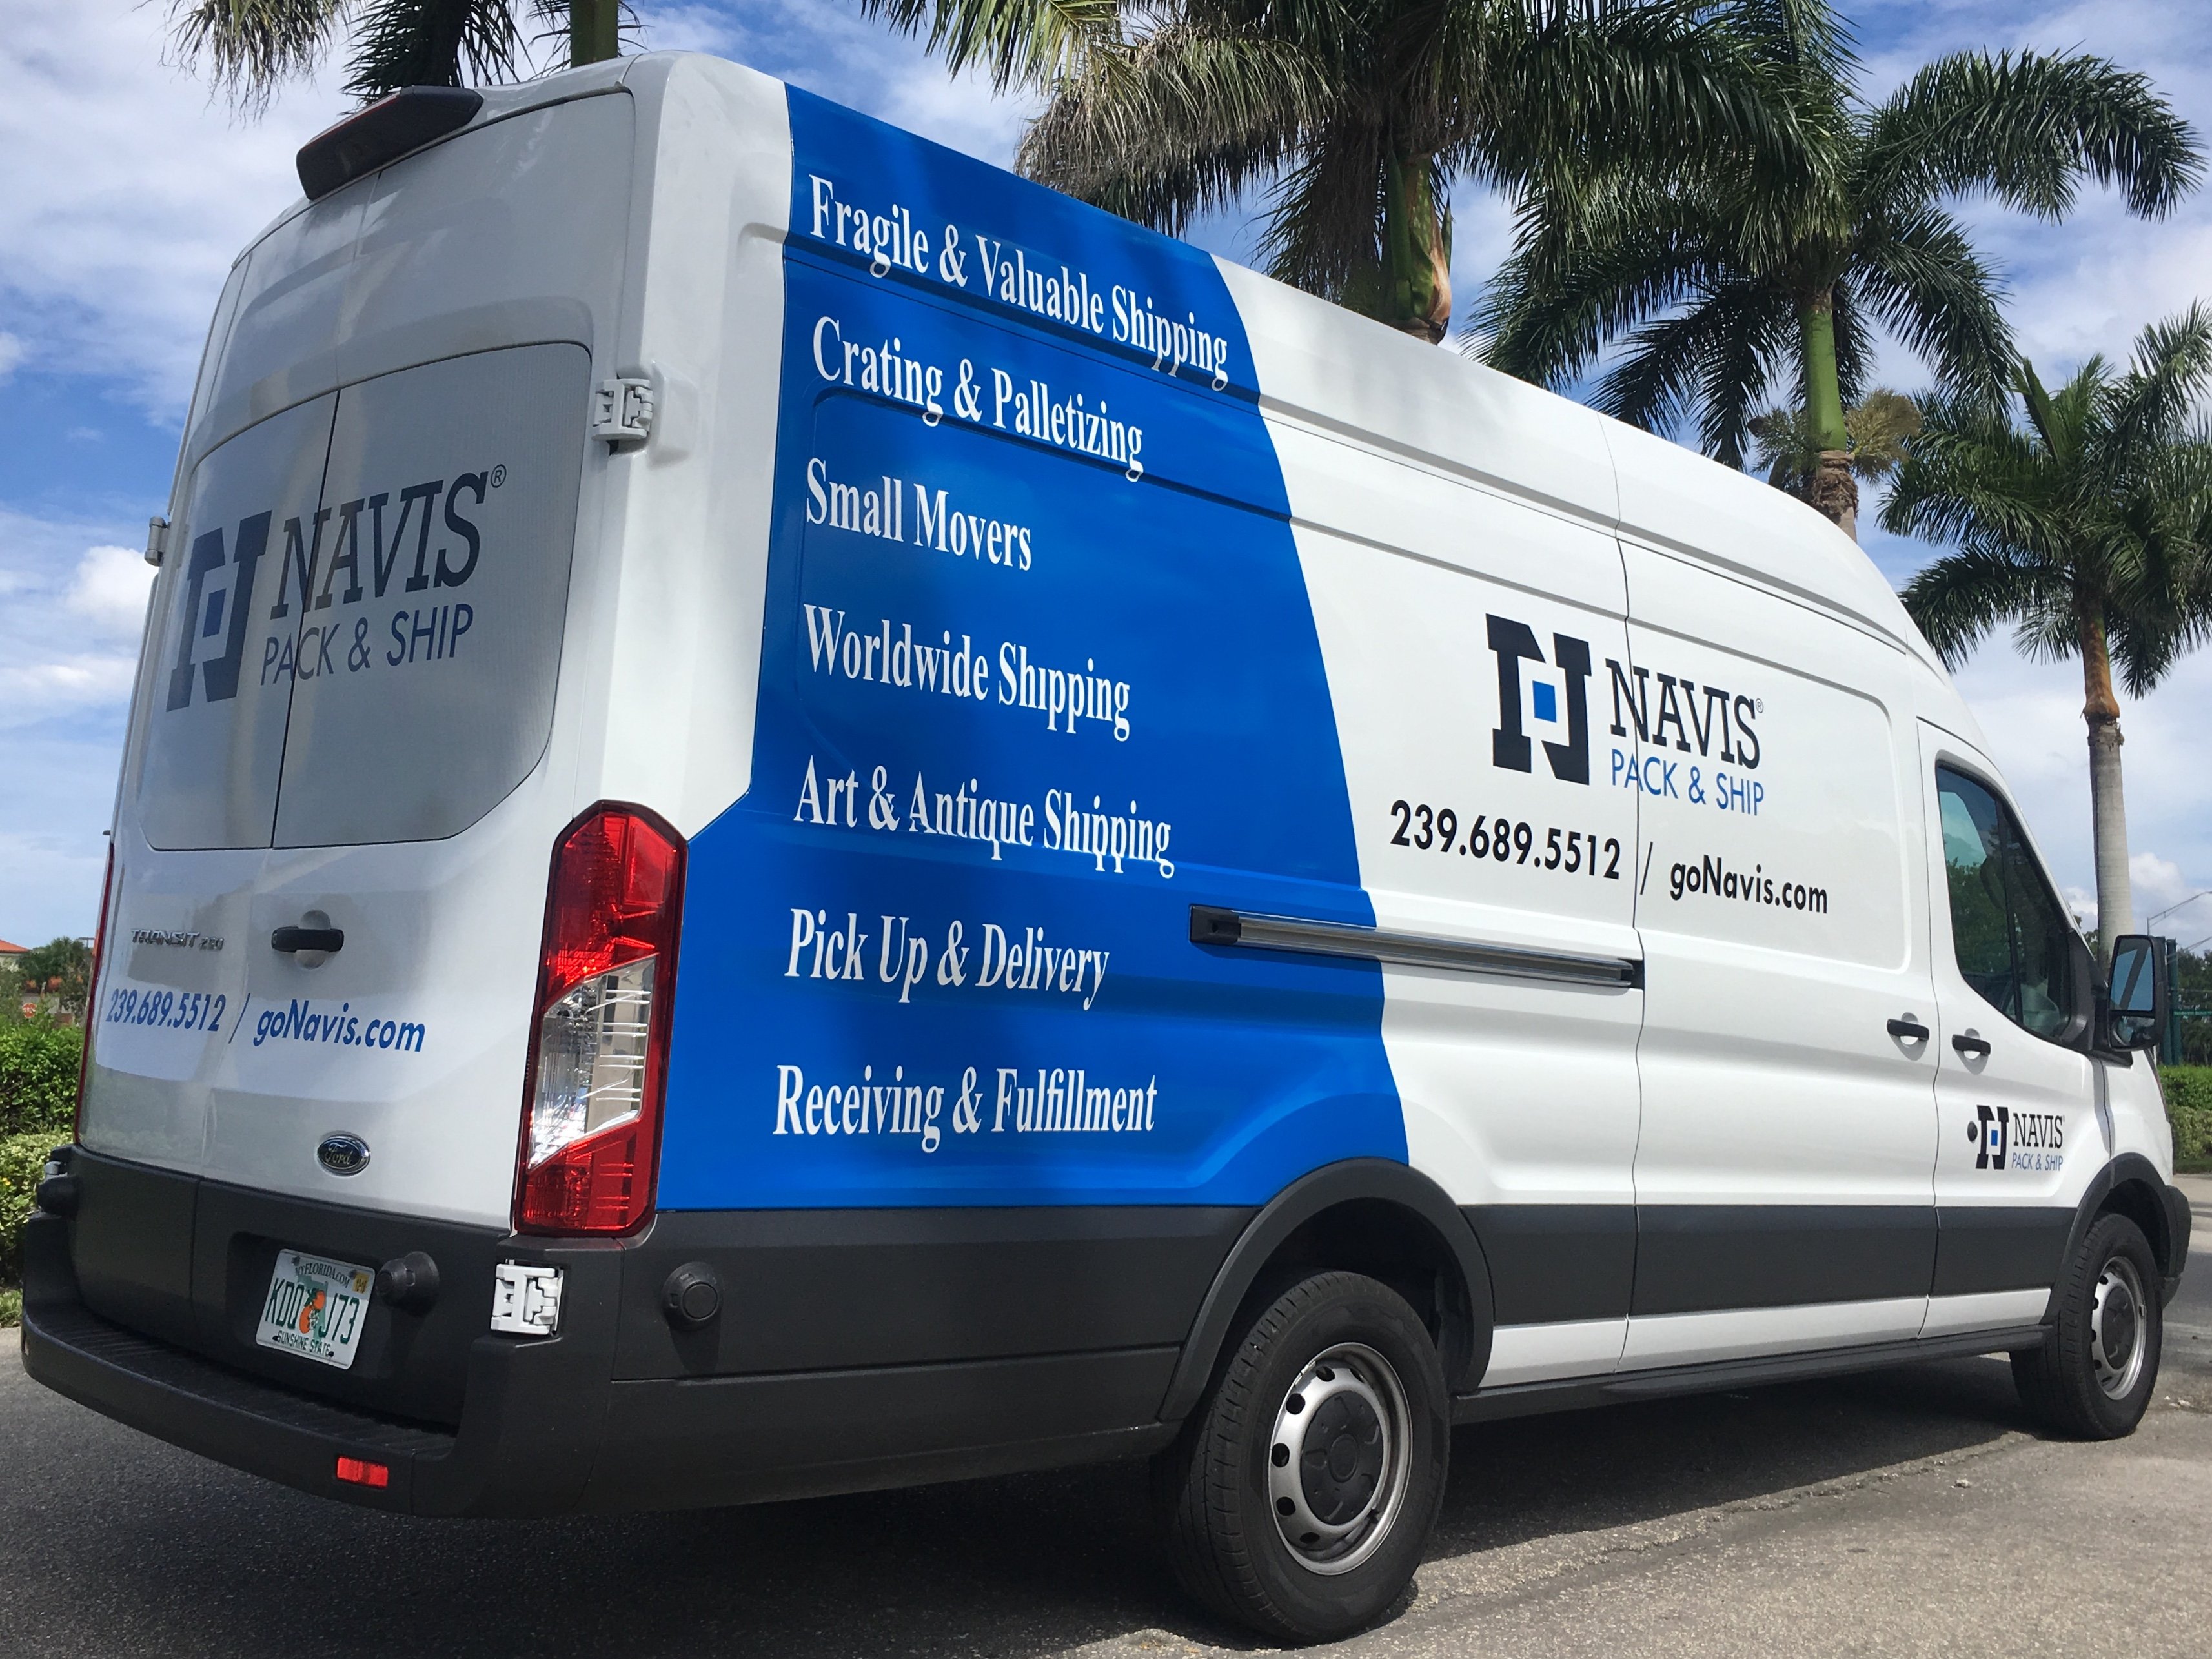 Pack and Ship Services in Naples, Collier County and throughout South Florida